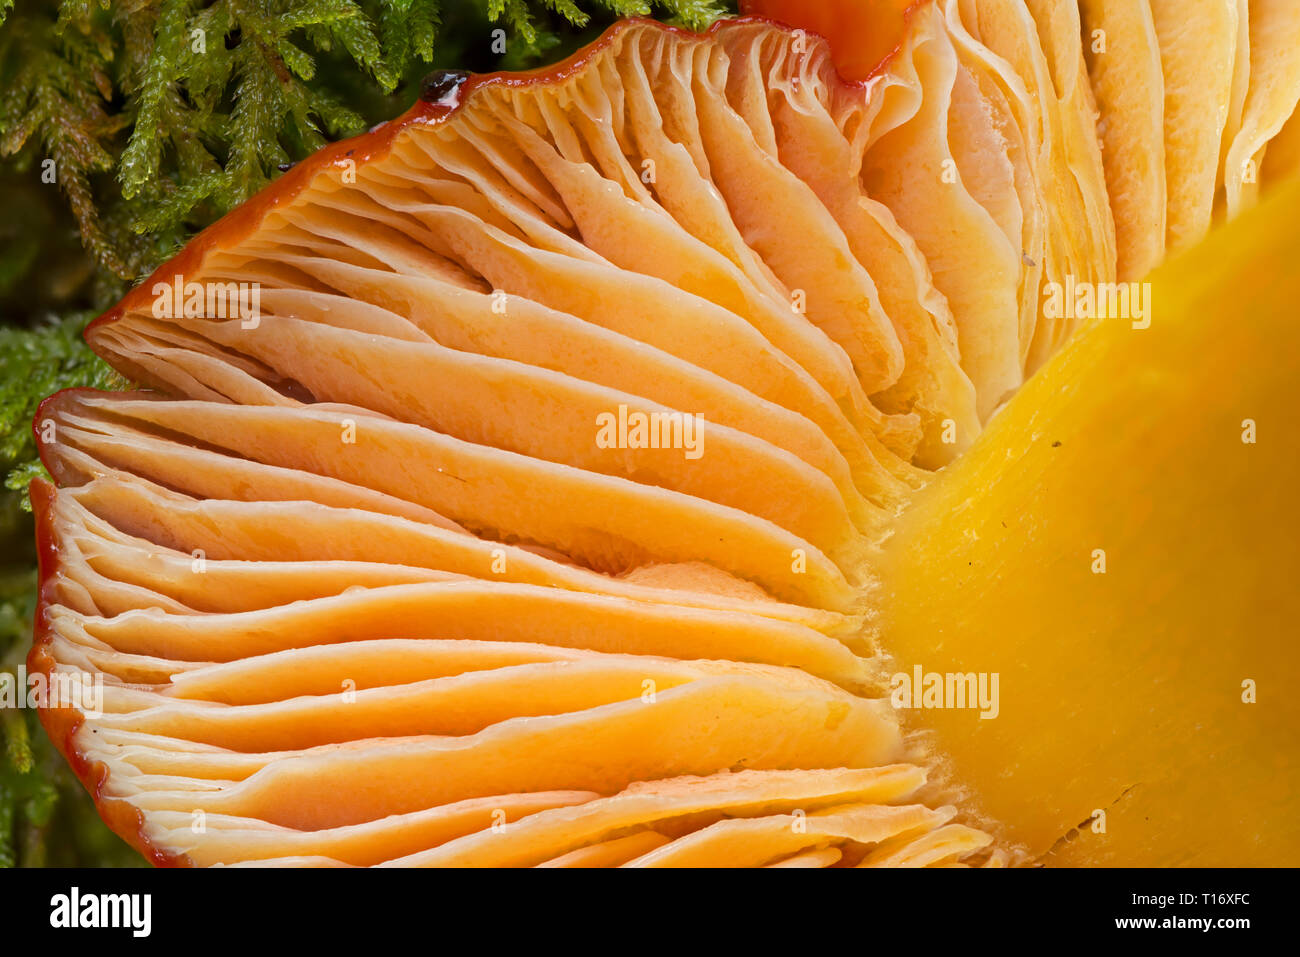 The gills of a scarlet waxy cap mushroom seem to glow from within Stock Photo